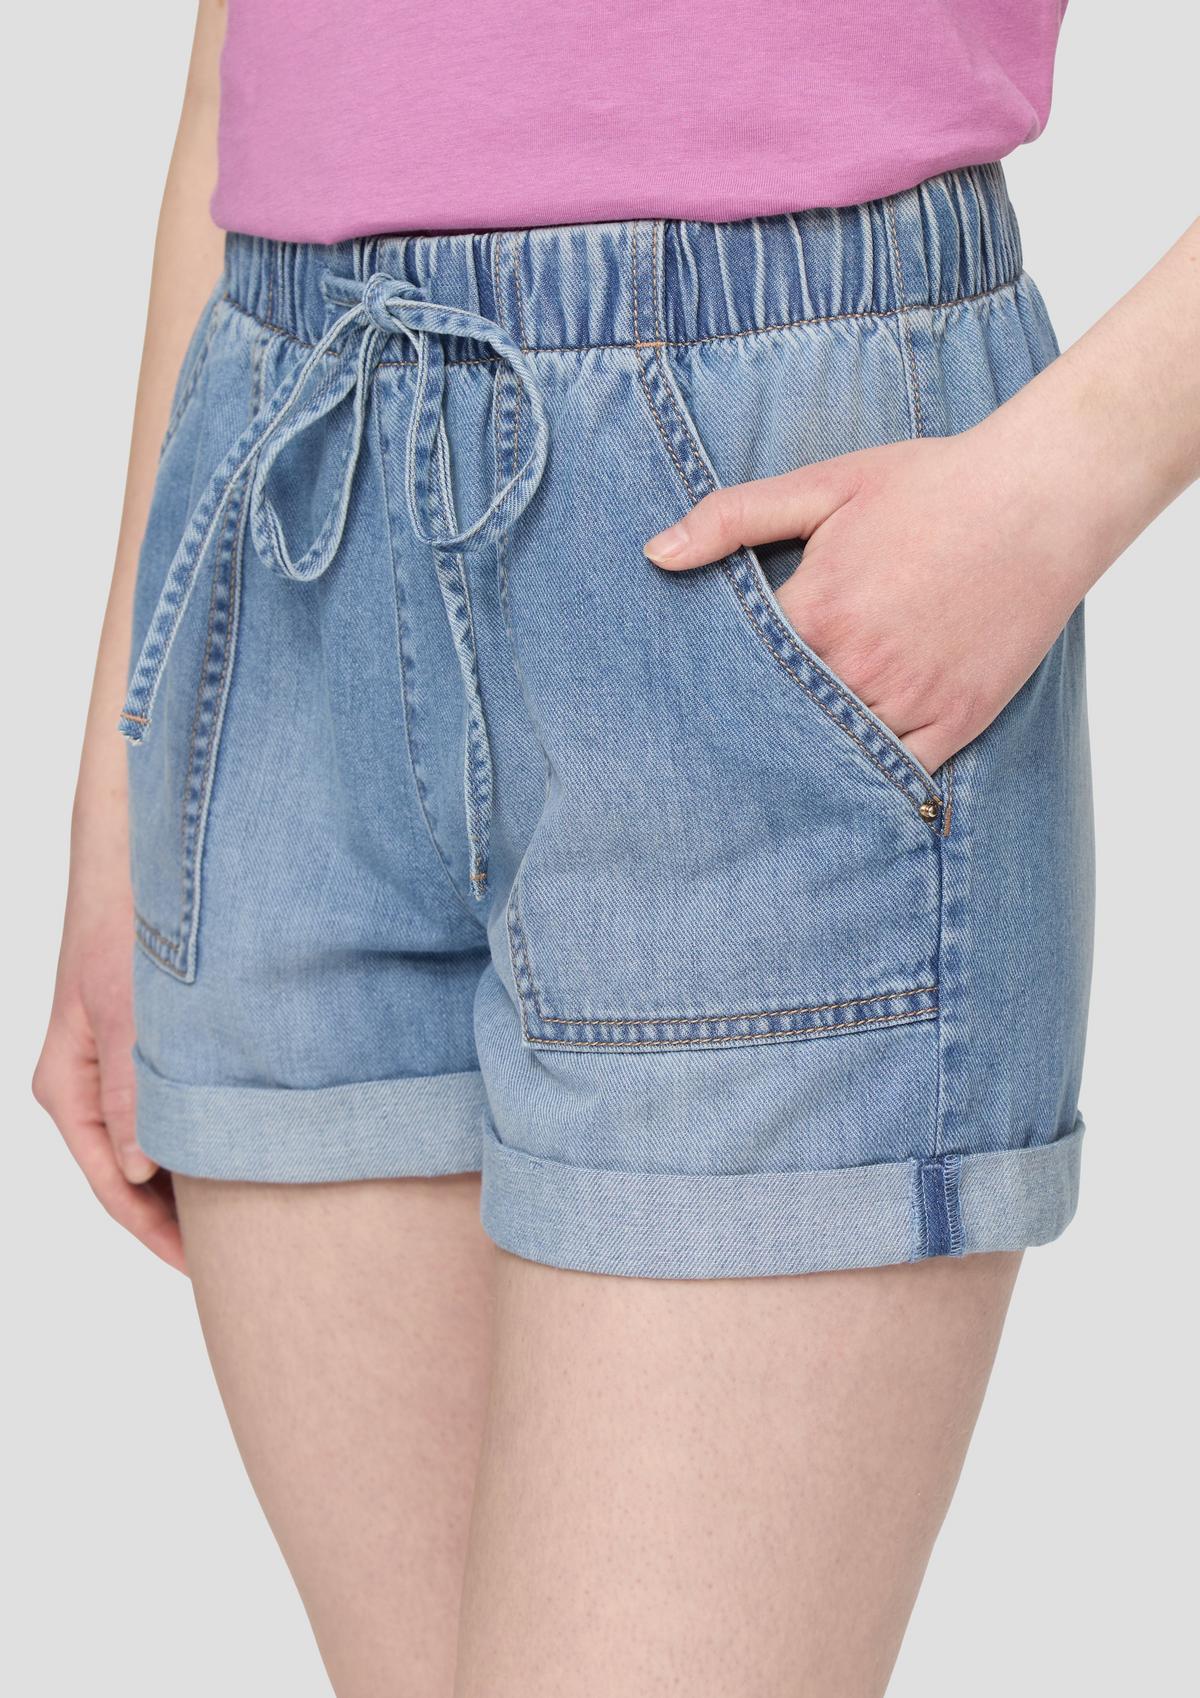 s.Oliver Denim shorts / relaxed fit / mid rise / wide leg